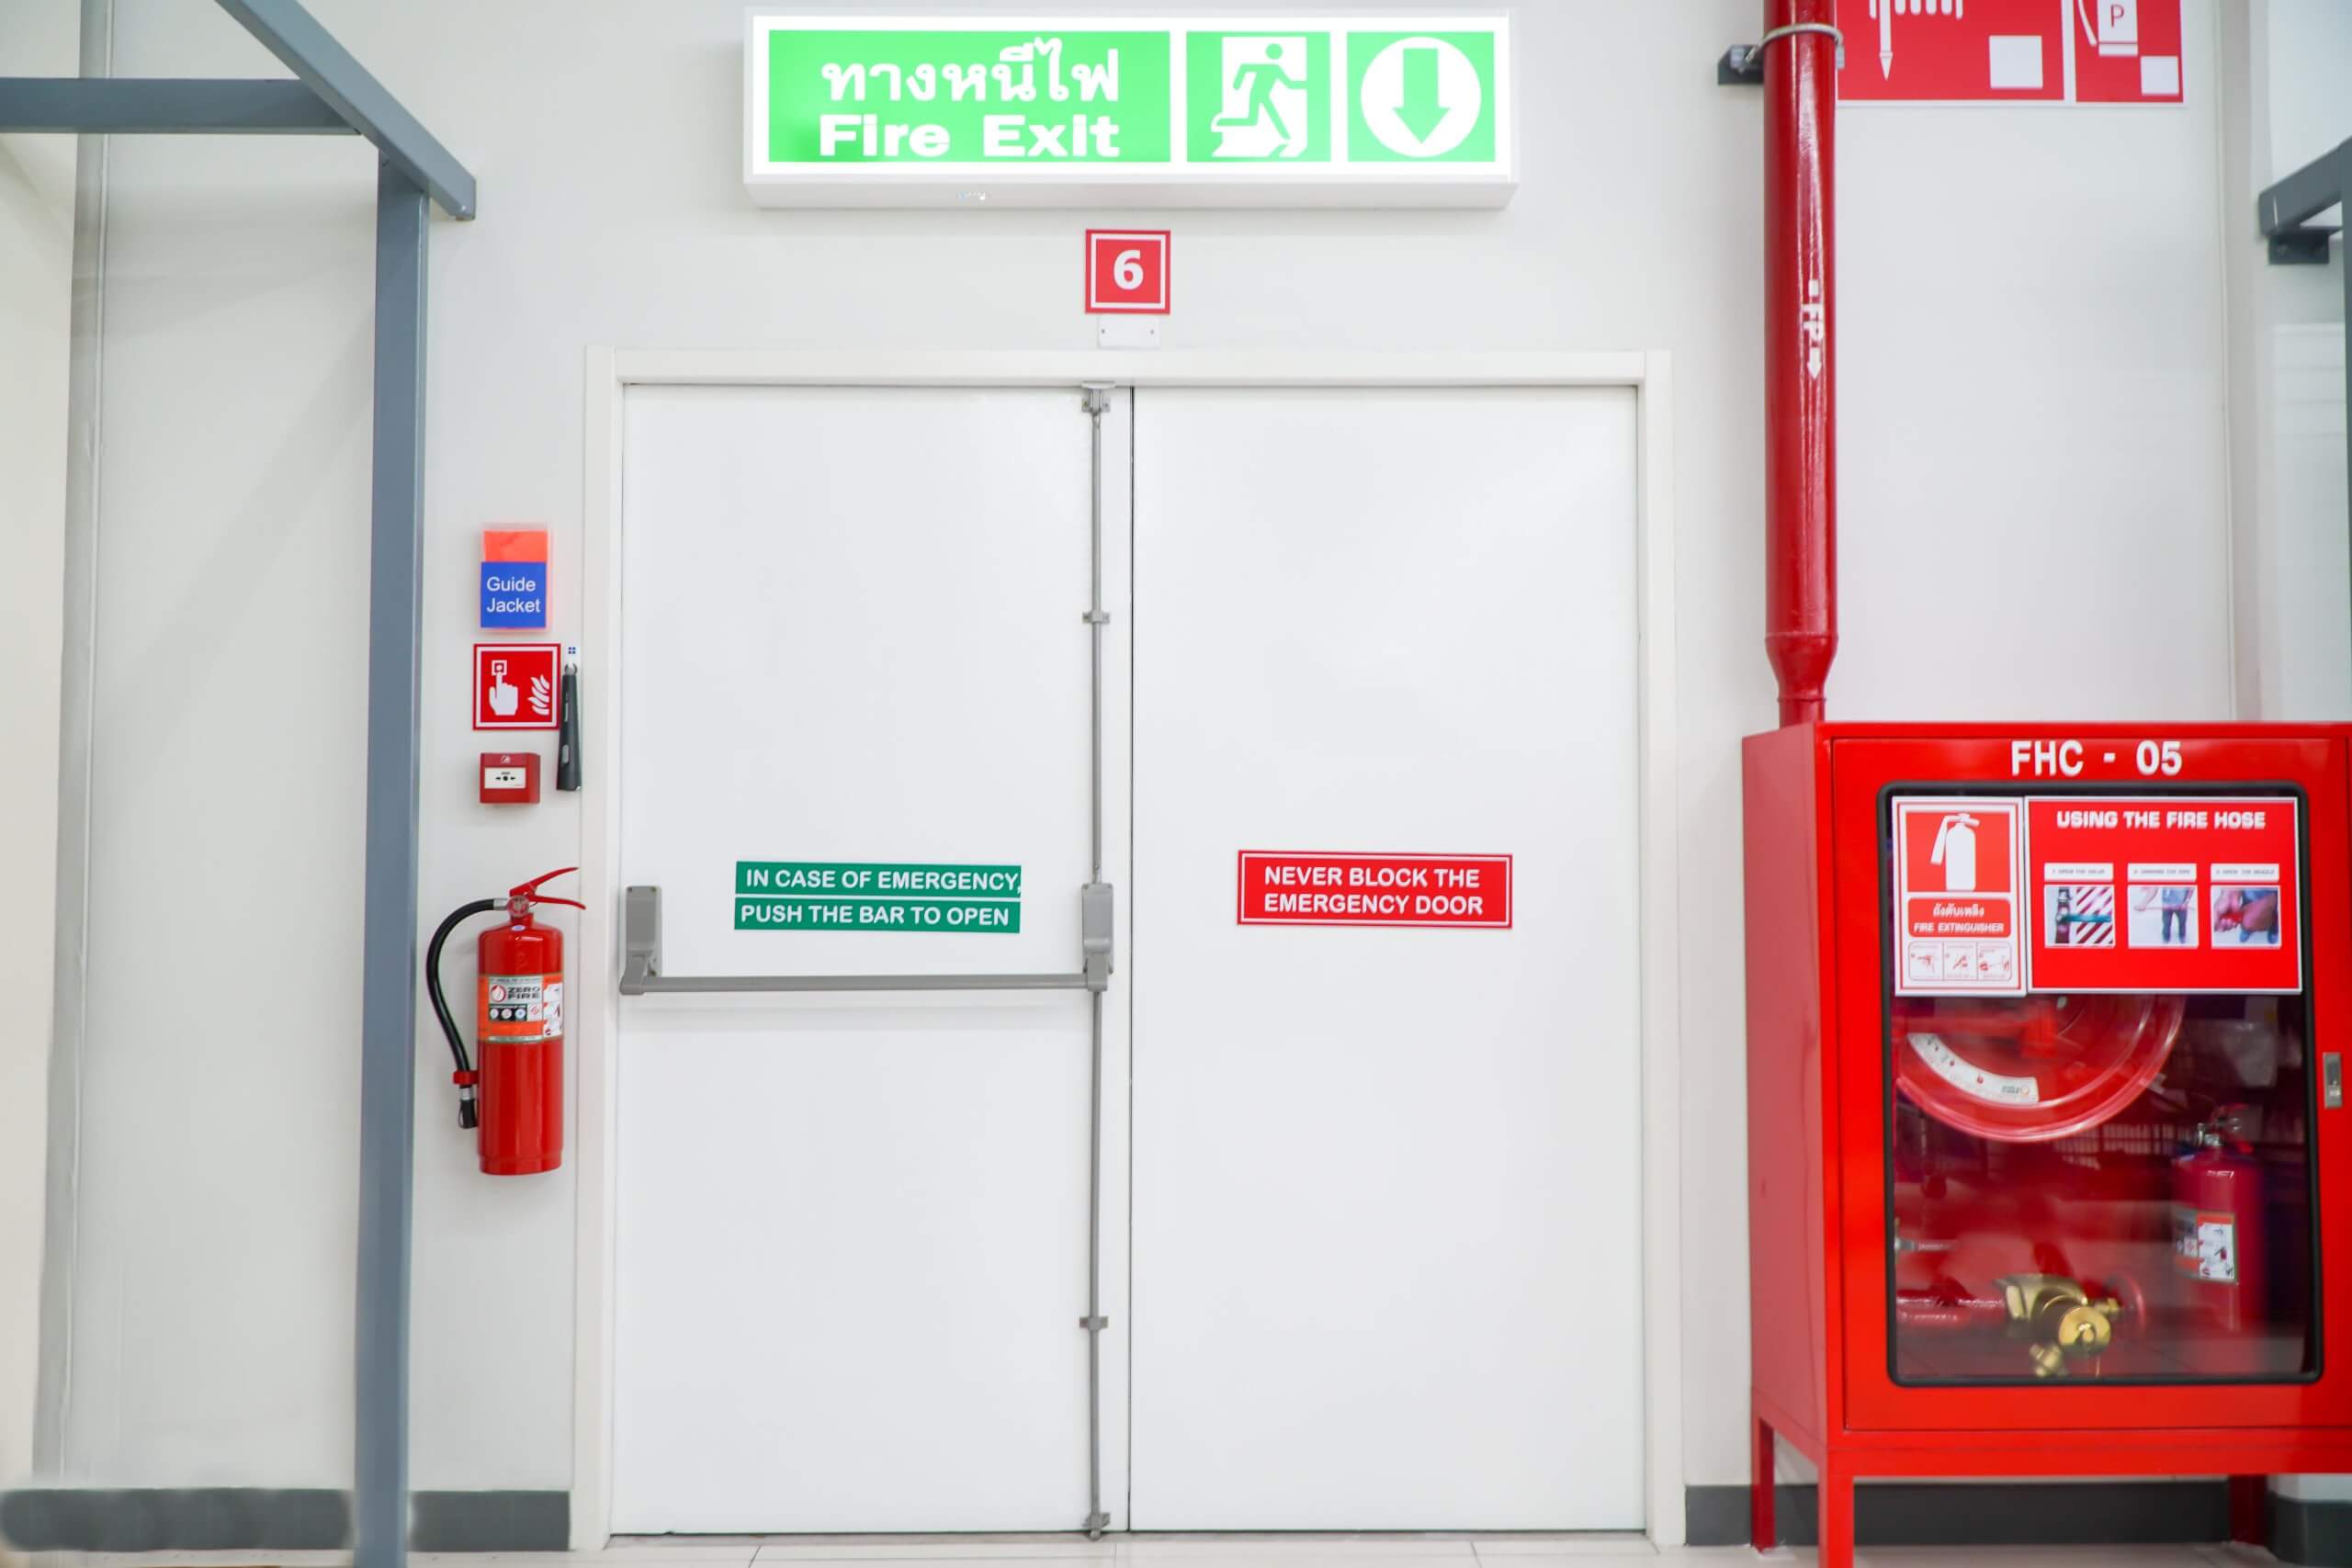 Building Emergency Exit with Exit Sign and Fire Extinguisher,fire protection concept